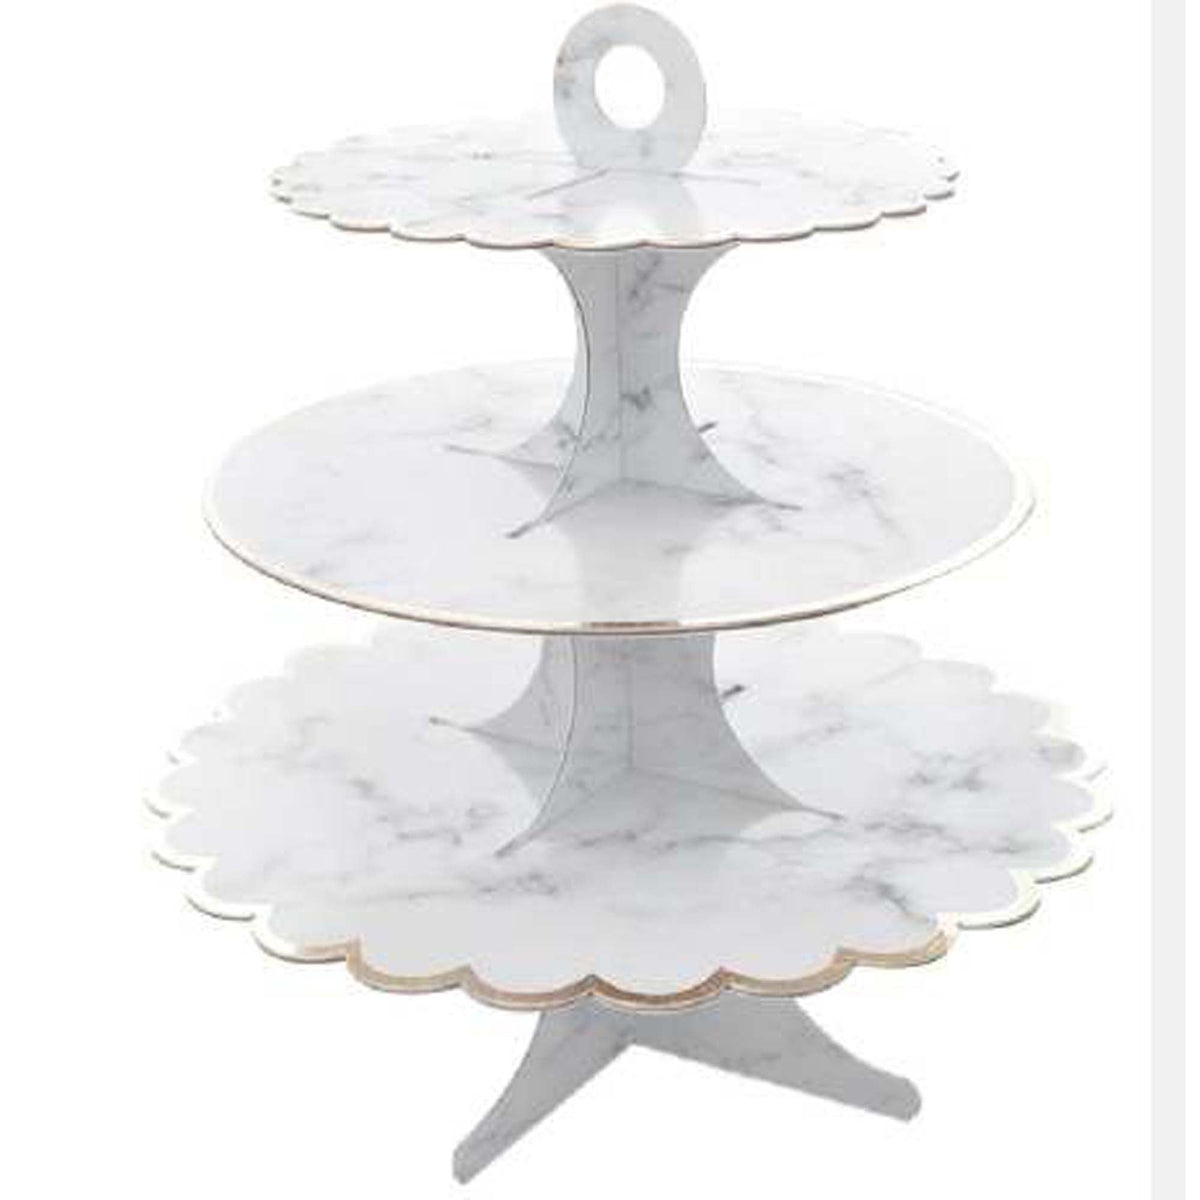 YIWU SANDY PAPER PRODUCTS CO., LTD Everyday Entertaining Cupcake Stand 3 Tiers, White Marble 810077652534